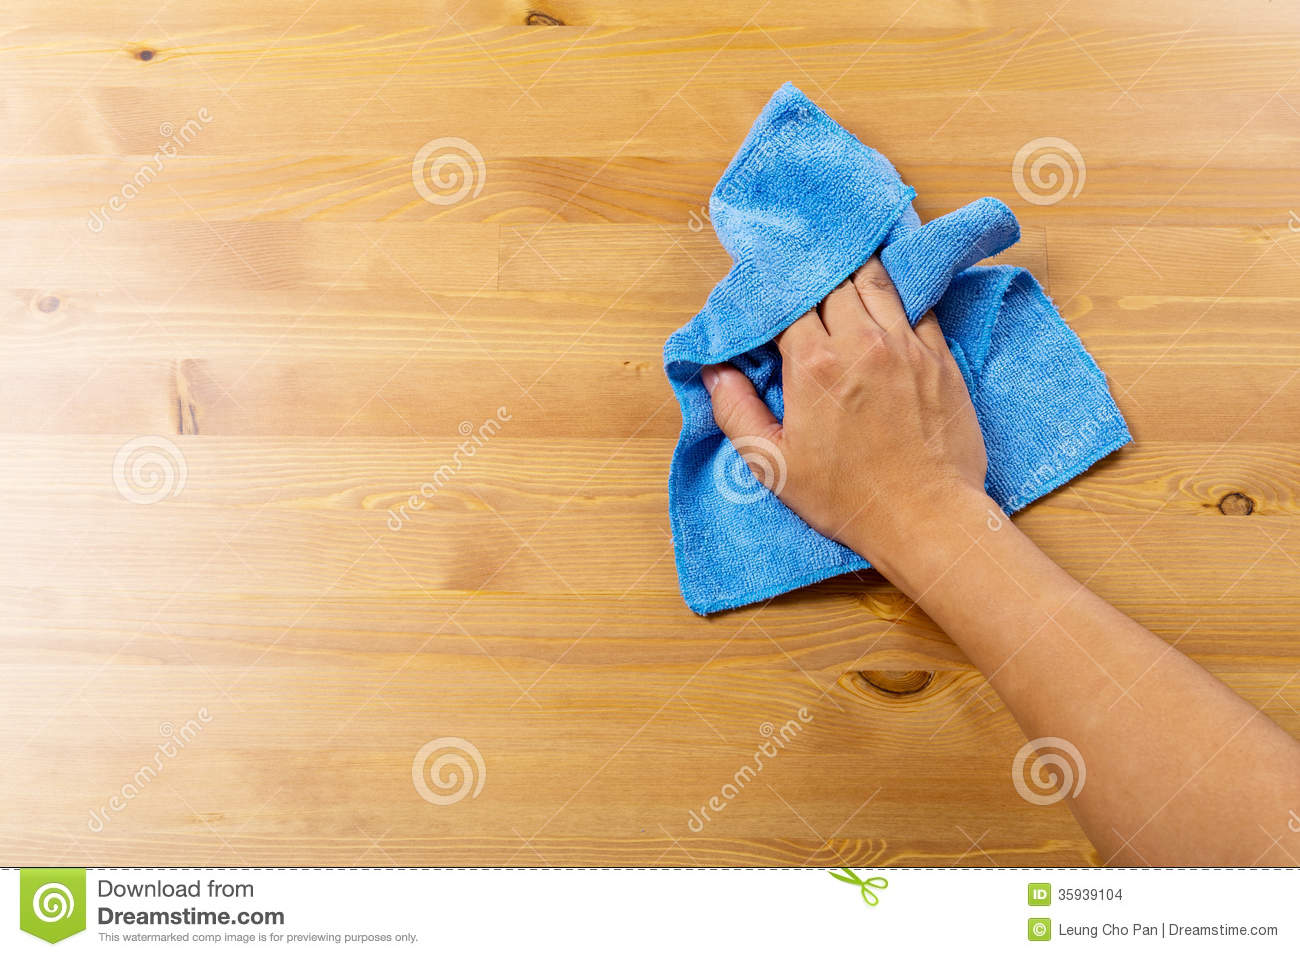 Cleaning Table By Blue Rag Stock Images   Image  35939104